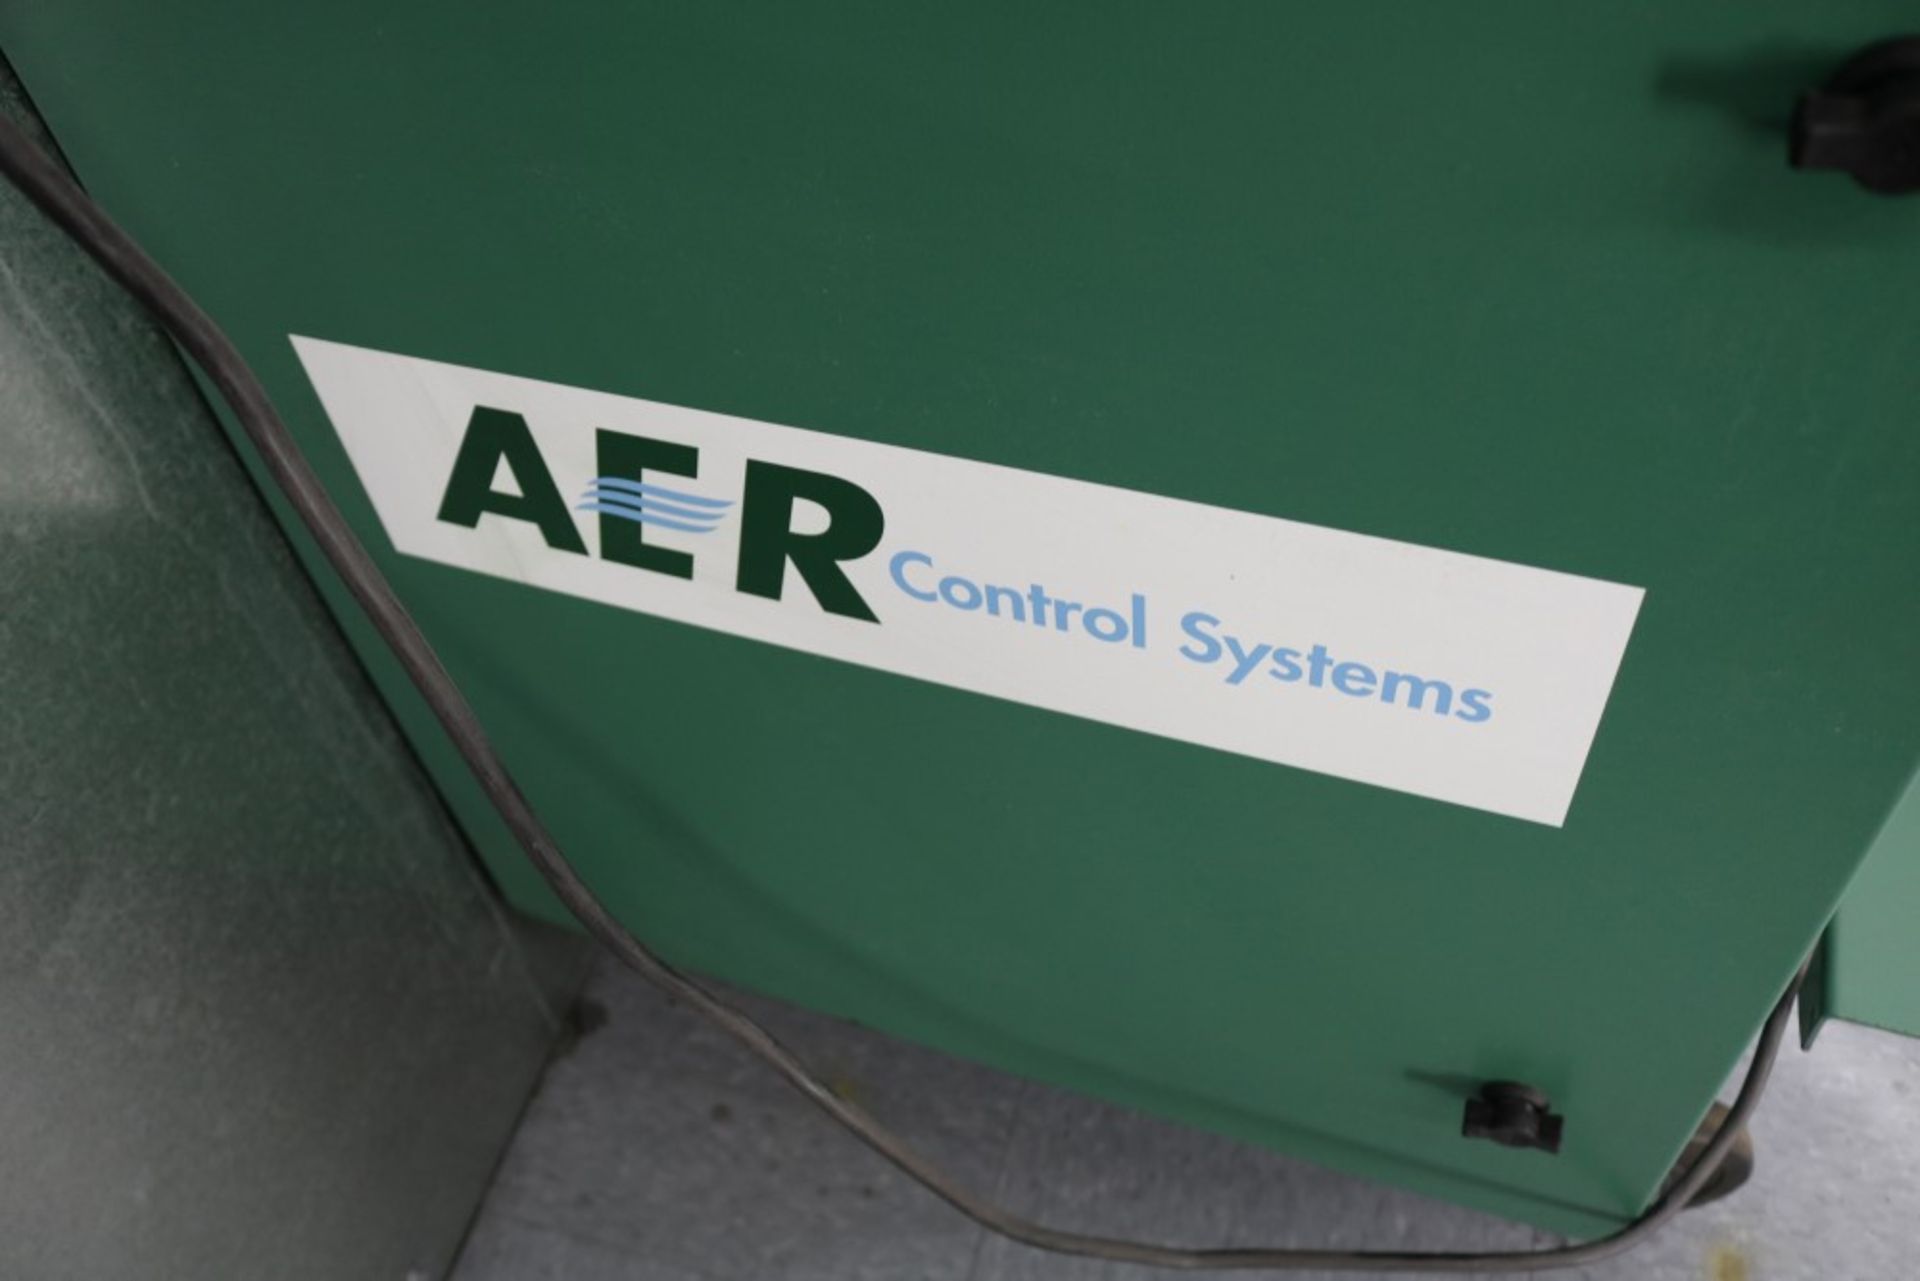 AER Control Systems Air Filter, Model DC-800, SN 5533, 1 HP - Image 2 of 6